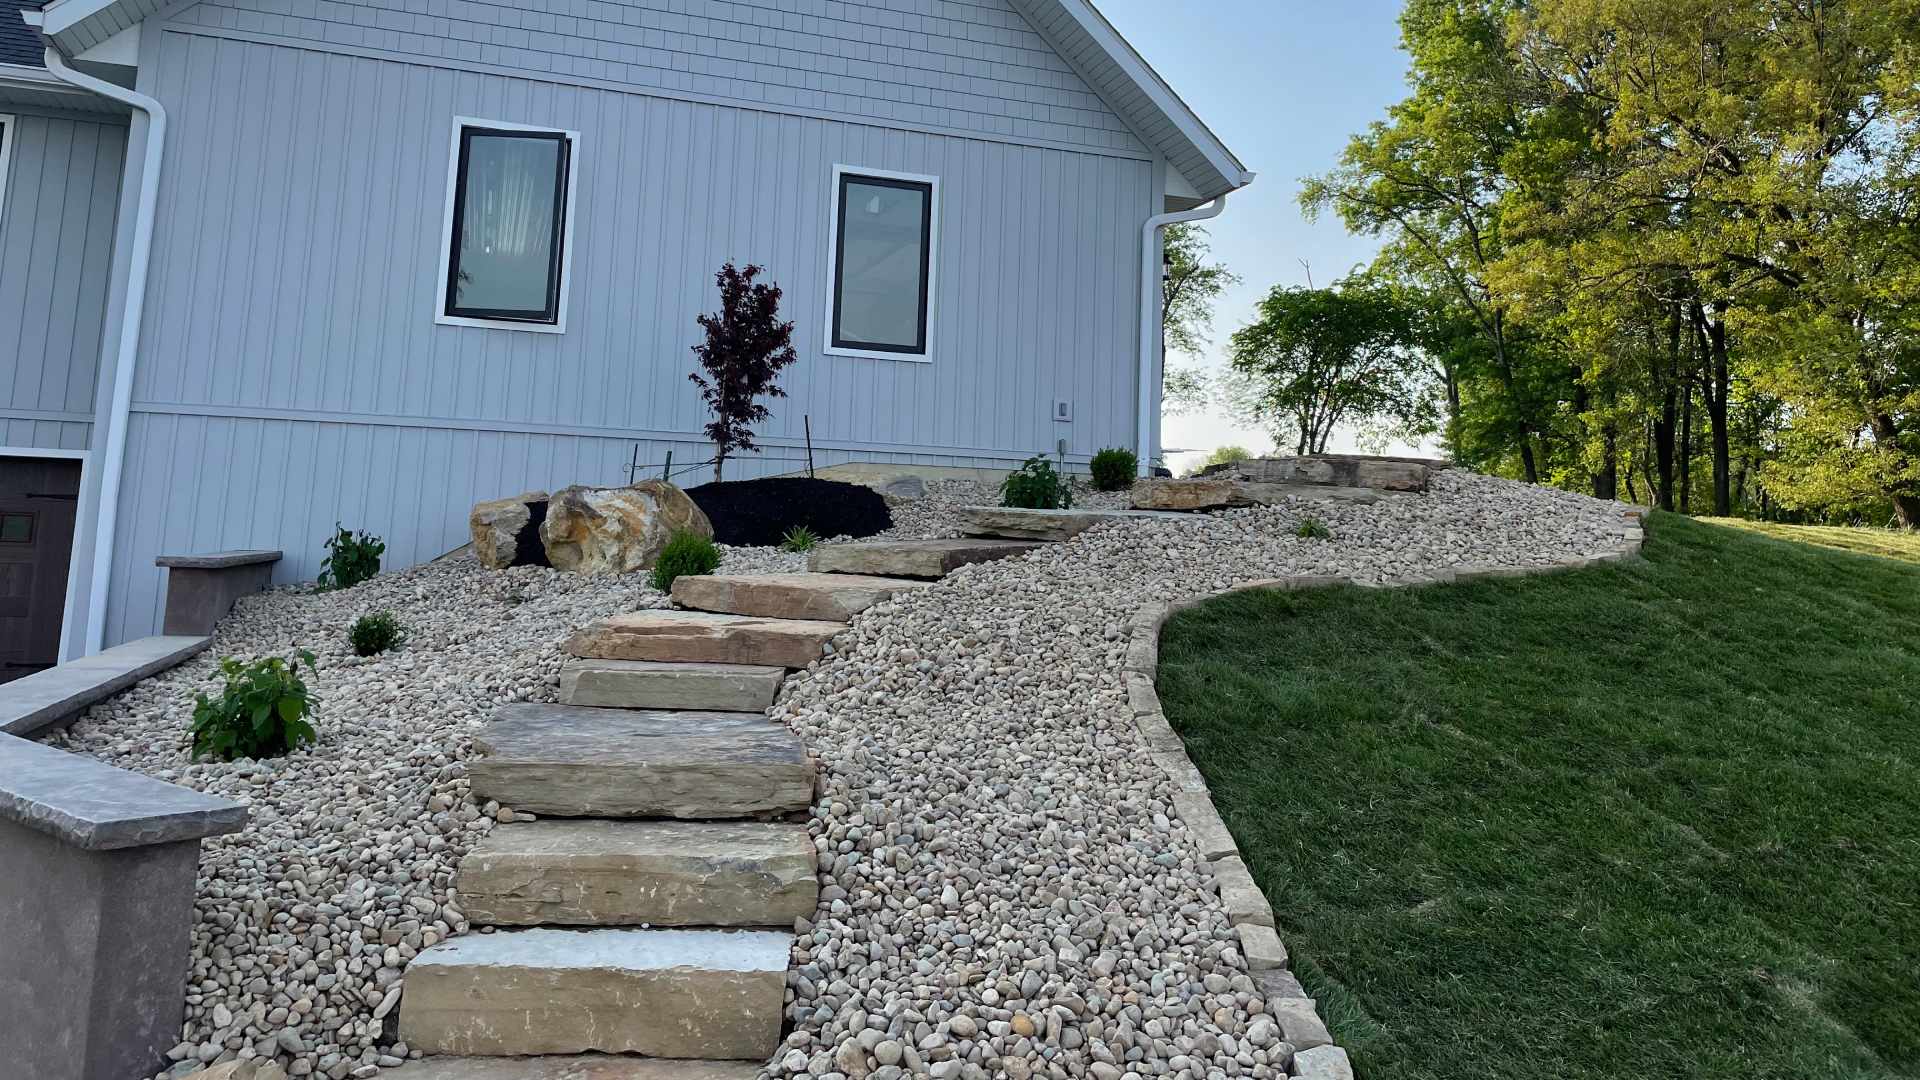 Outdoor Step & Landscape Bed Installation Project in Greenville, IL